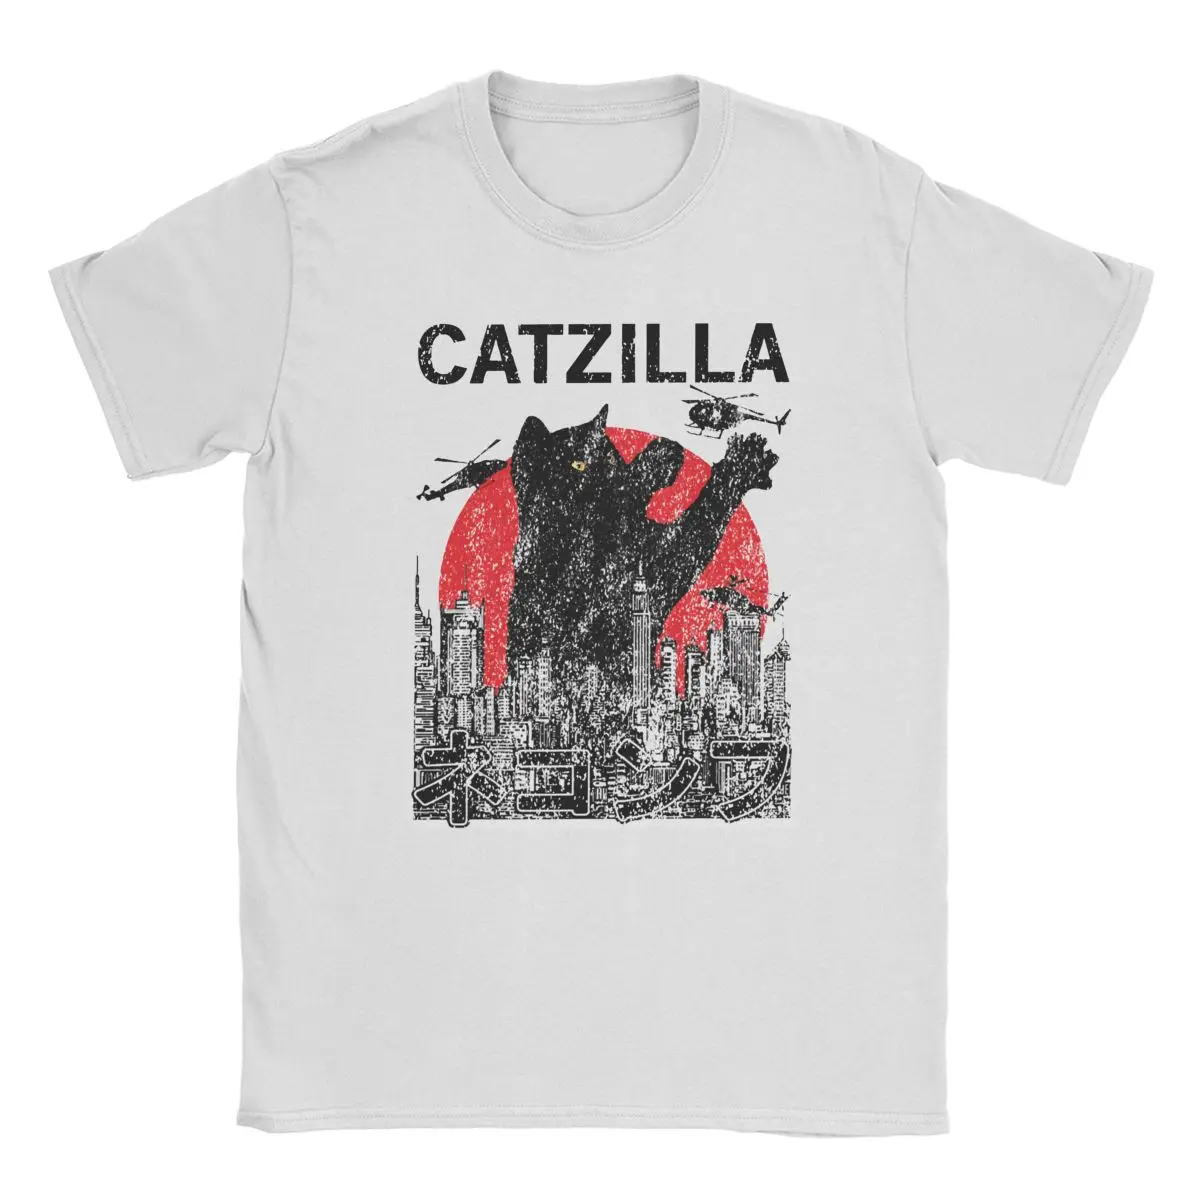 

Catzilla Japanese Vintage Sunset Style Cat Kitten Lover T-Shirts for Men Funny Cotton Tees Short Sleeve T Shirt Printed Tops